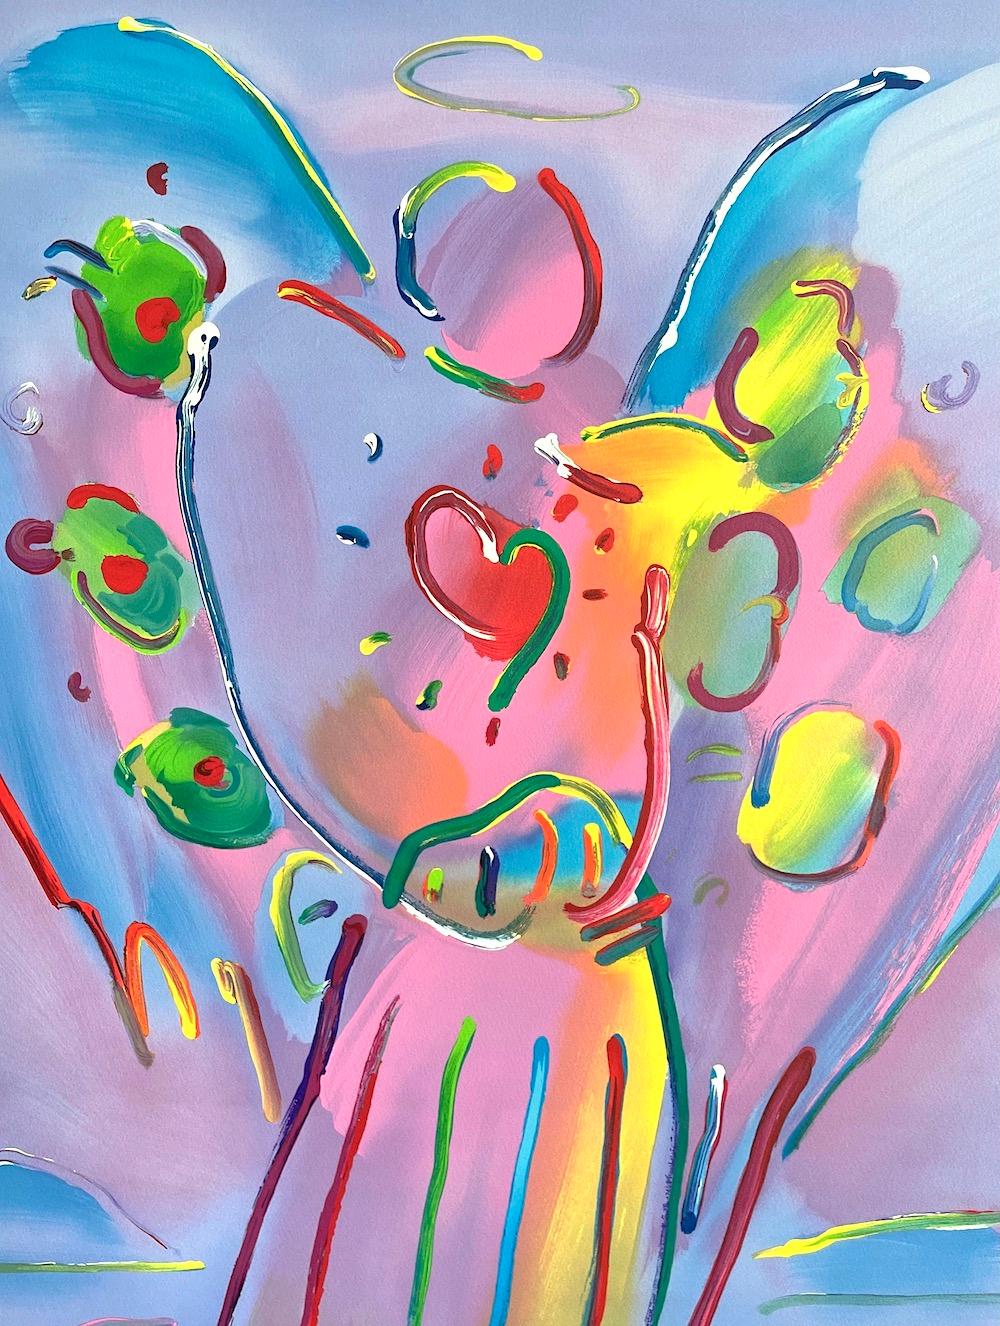 ANGEL WITH HEART Signed Lithograph, Guardian Angel, Red Heart, Rainbow Colors - Print by Peter Max